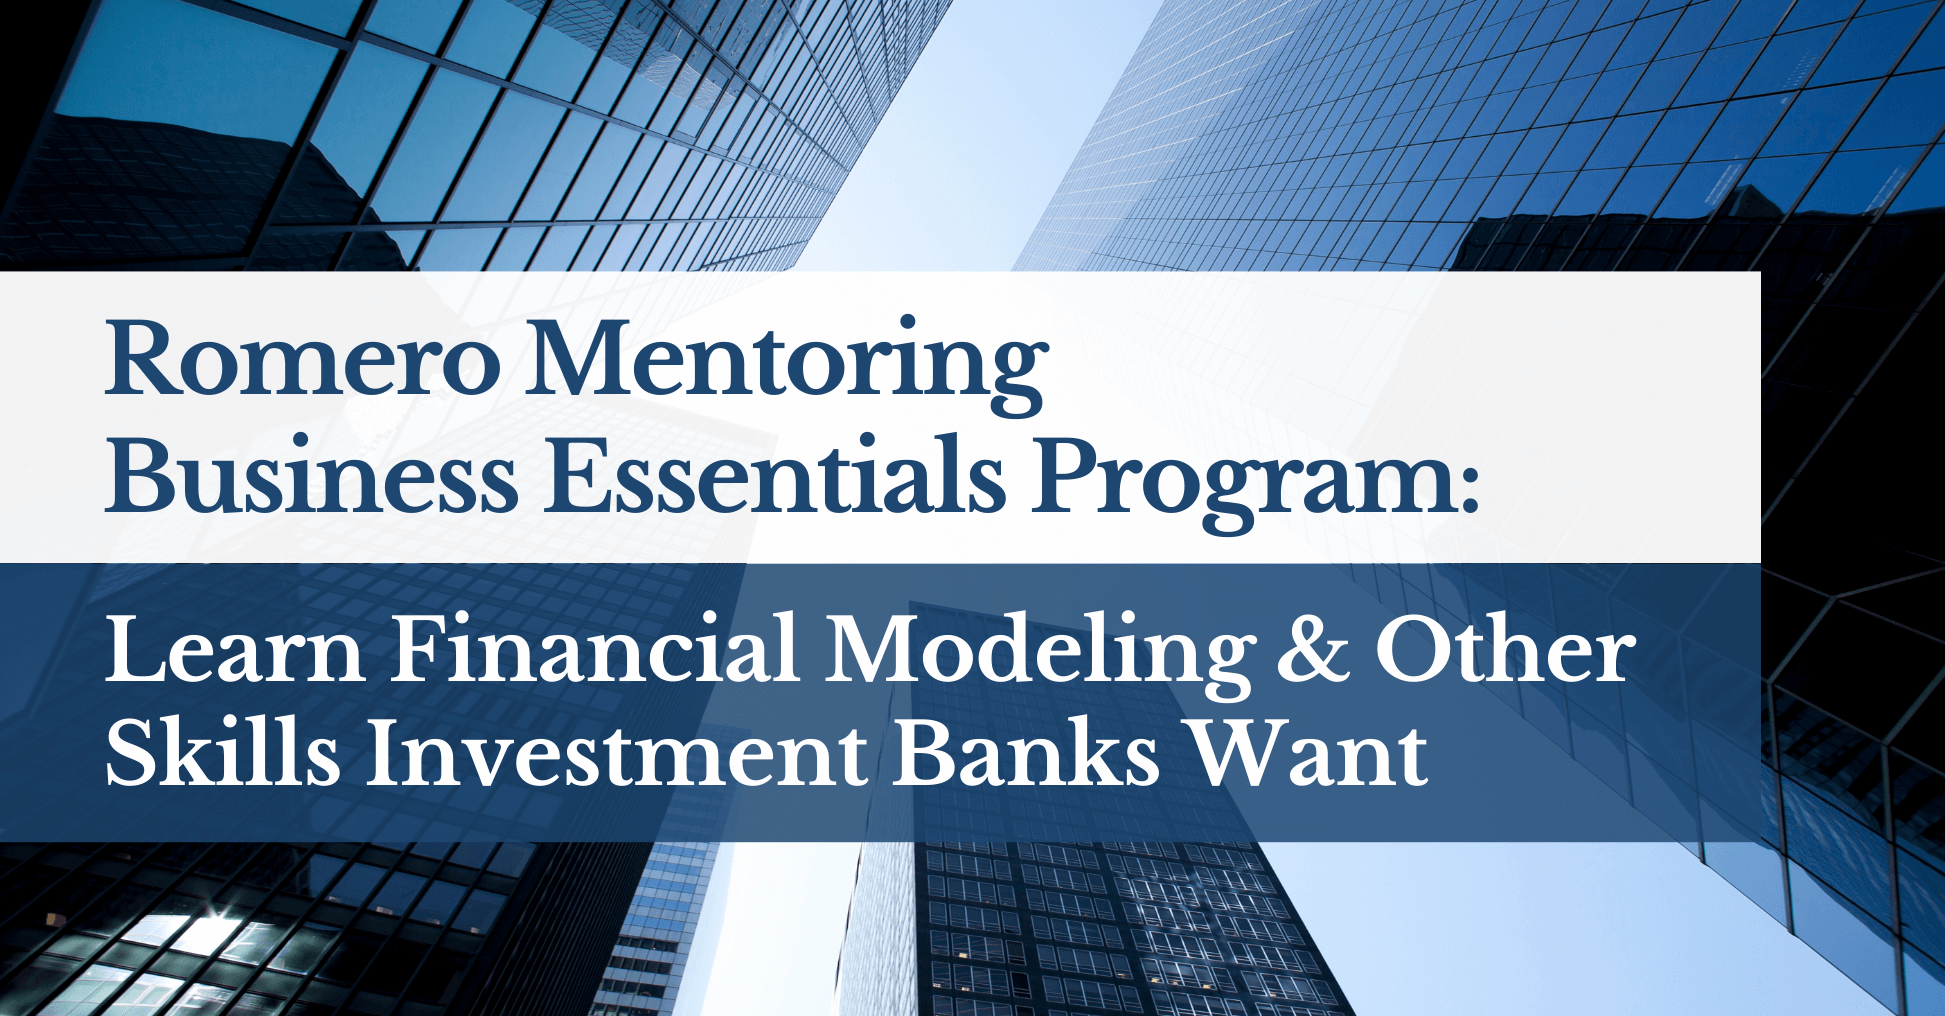 Romero Mentoring Business Essentials Program: Learn Financial Modeling & Other Skills Investment Banks Want